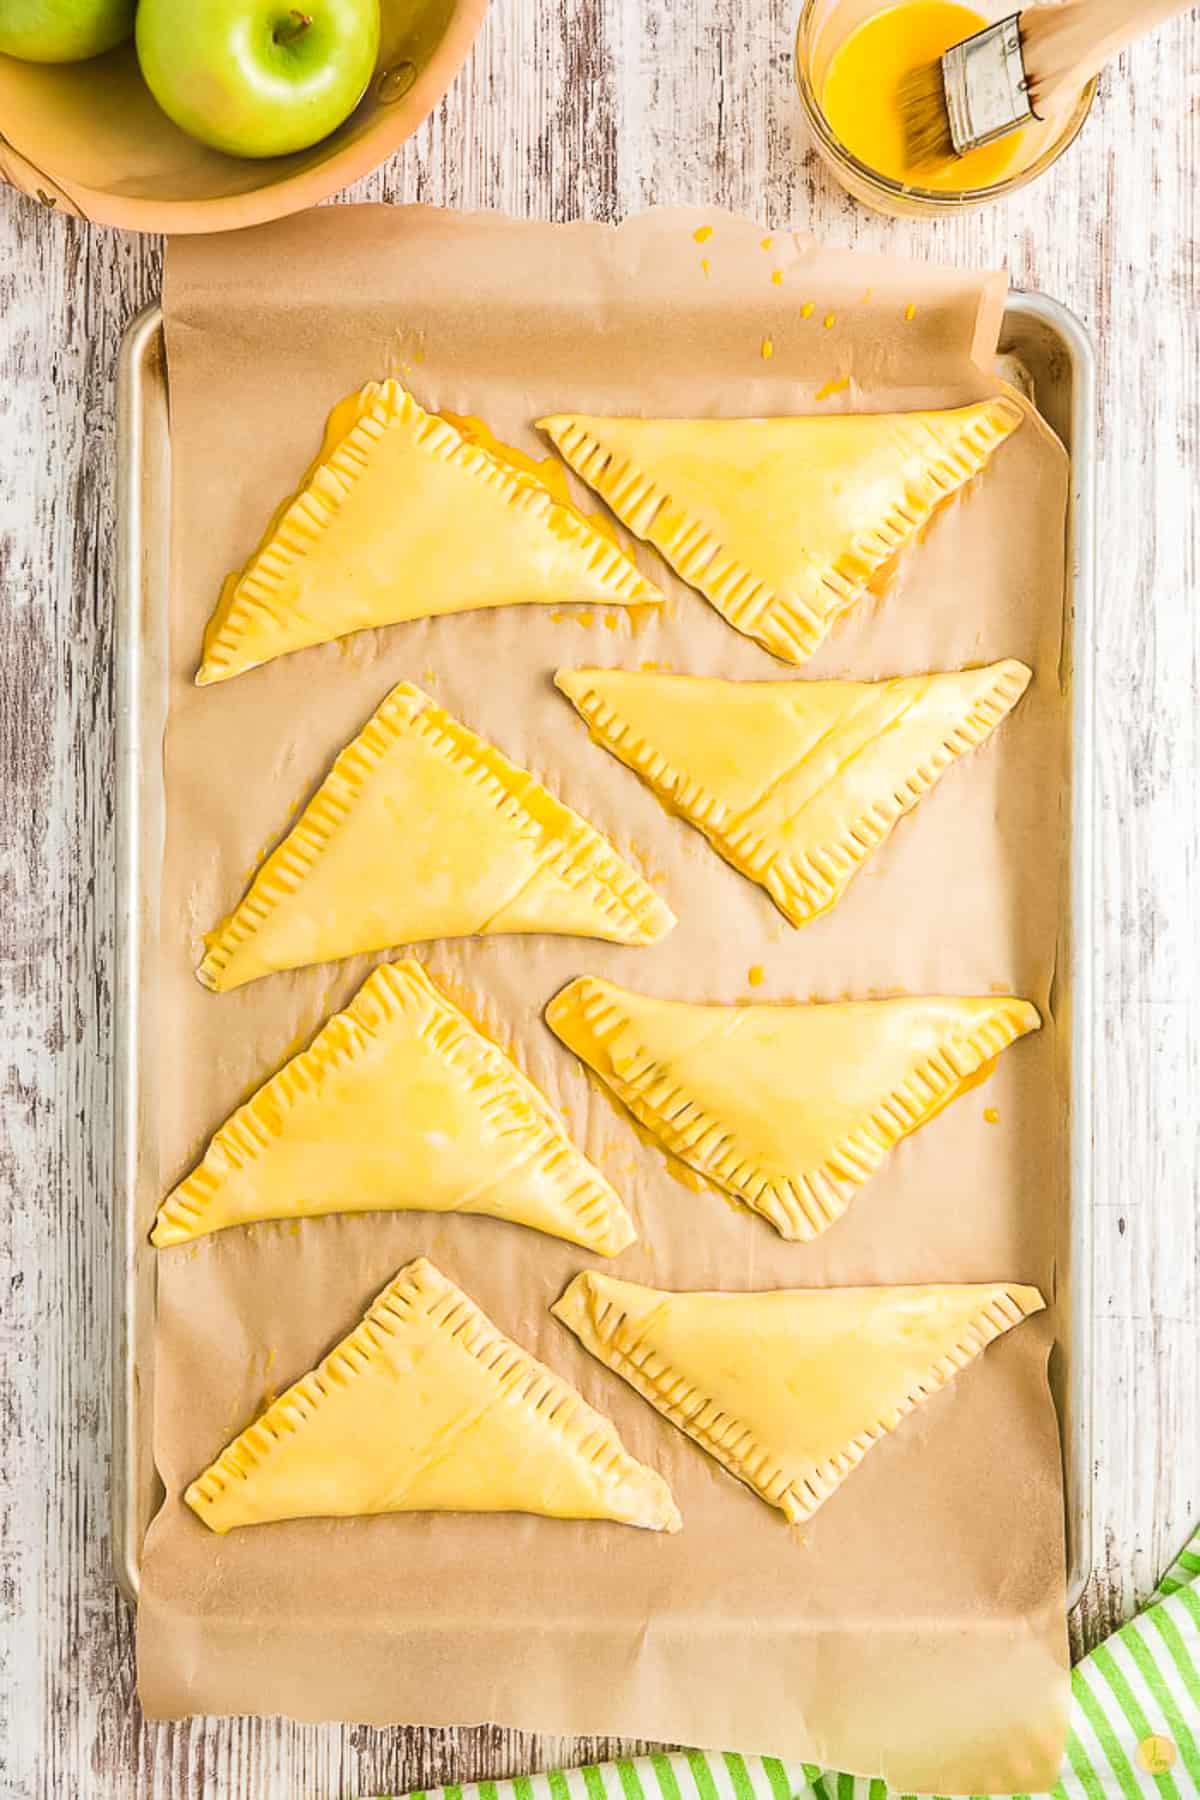 unbaked turnovers on a baking sheet